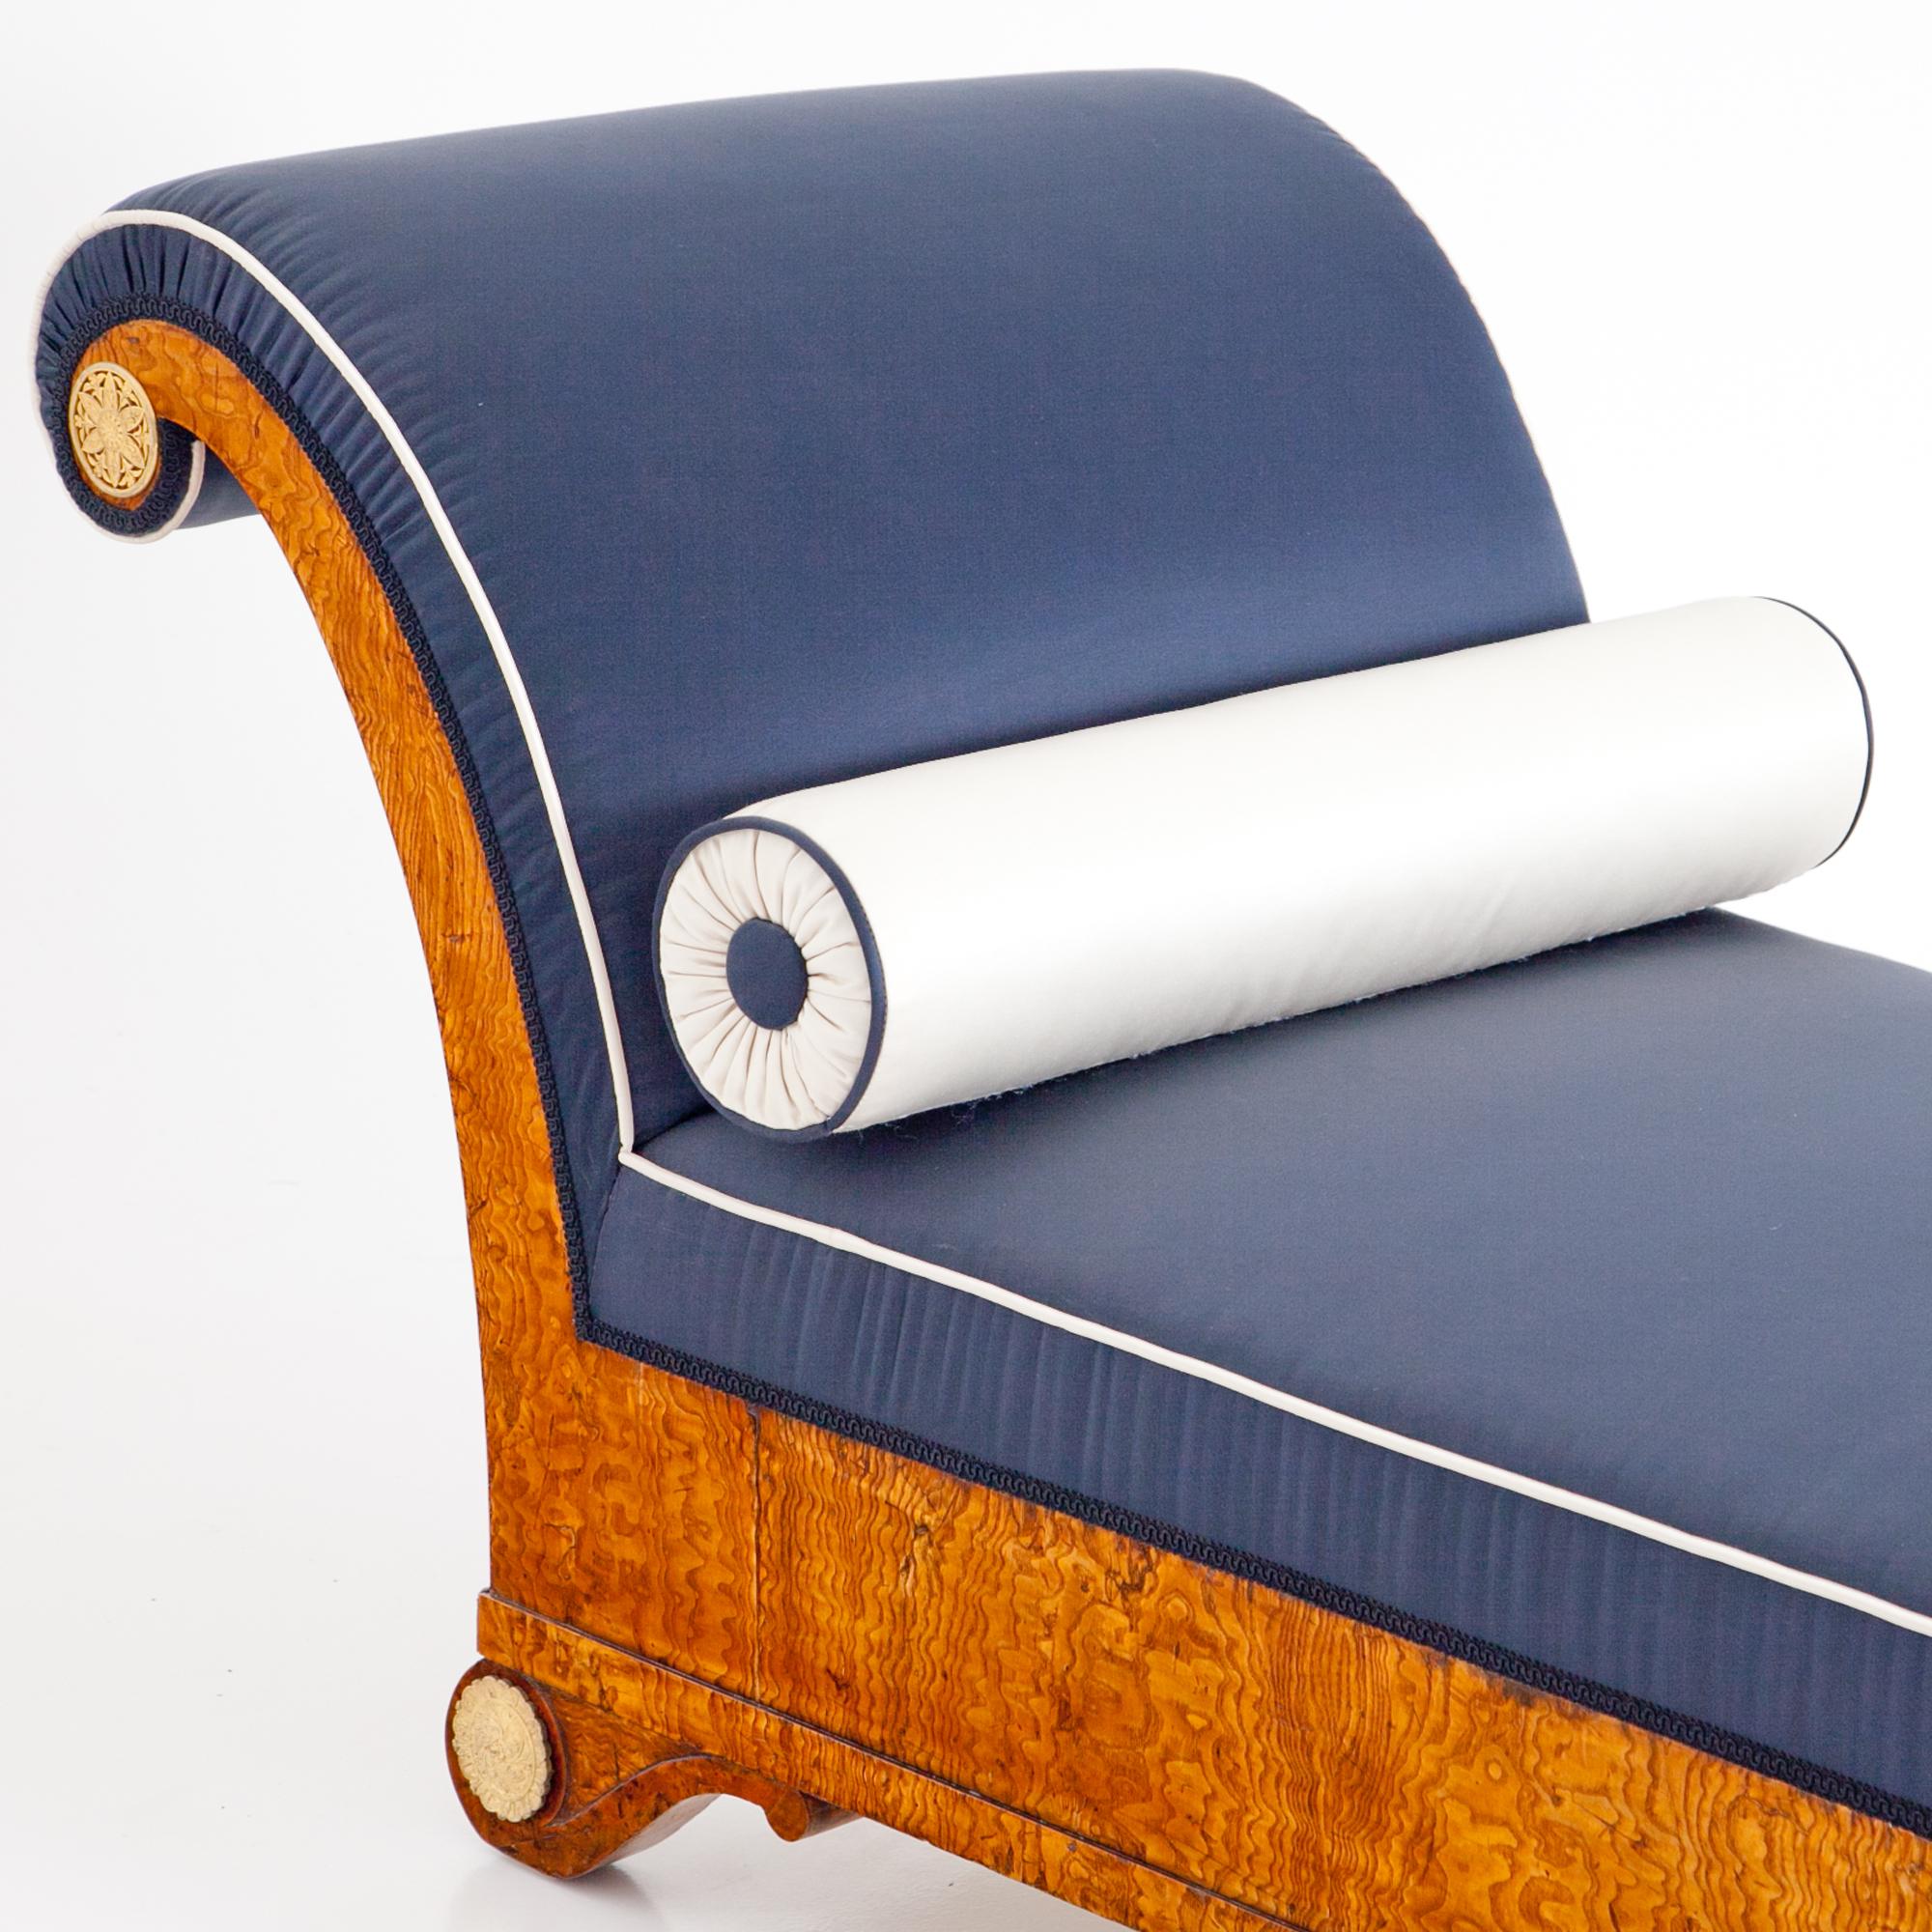 Empire Recamiere in ash-tree veneered with fire gilt bronze rosettes on the curved backrest and feet. The length of the bed is 155 cm, the seat height 40 cm. The Recamiere was completely reupholstered with a dark blue fabric with white piping. The